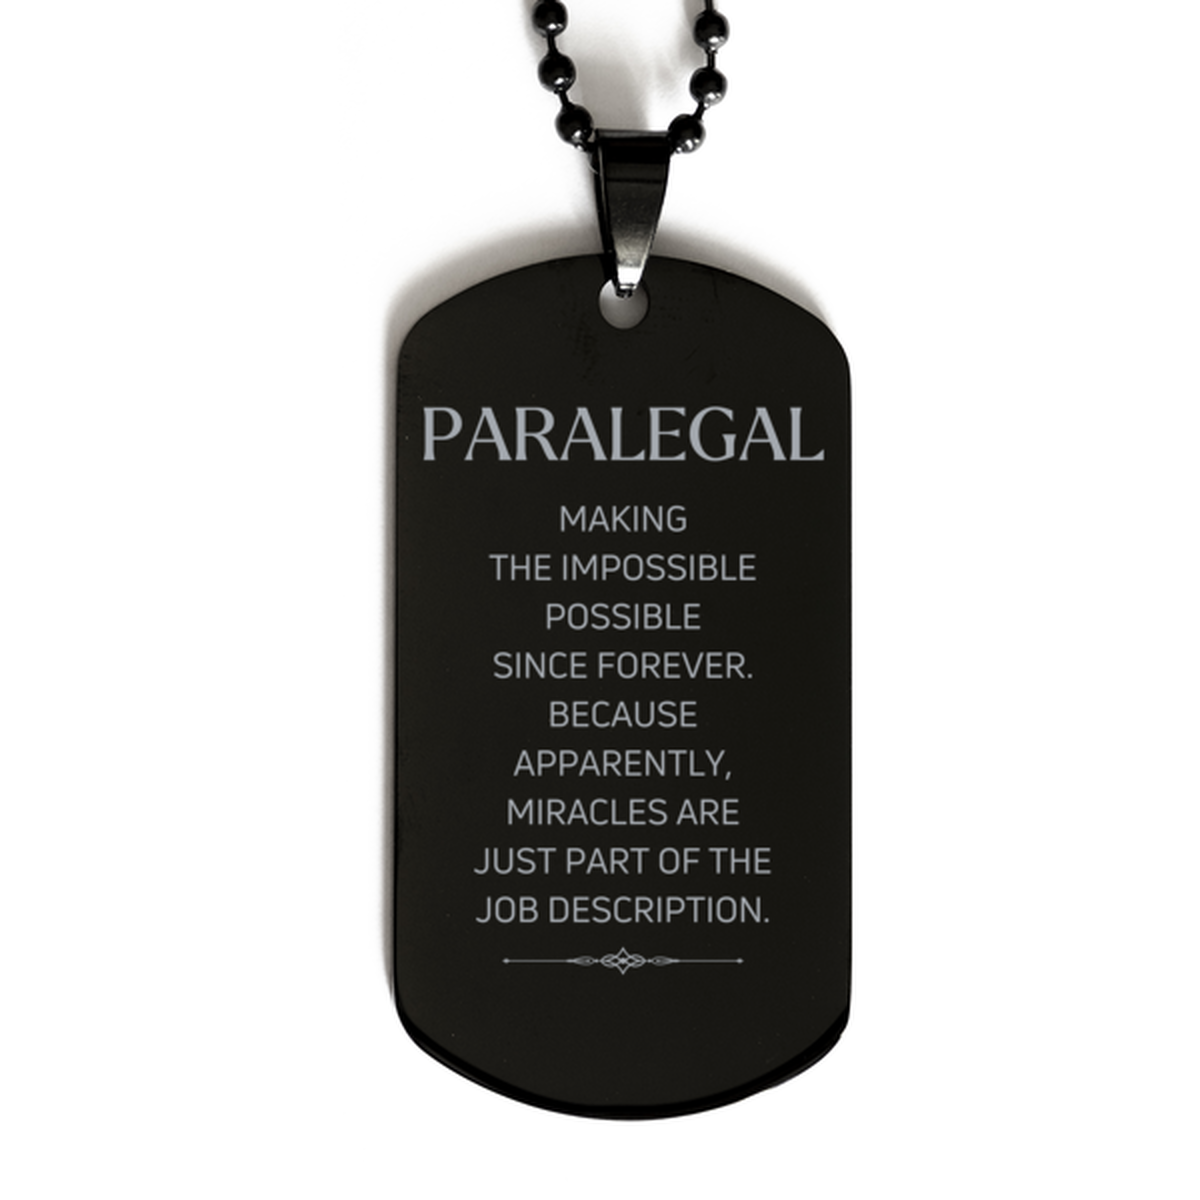 Funny Paralegal Gifts, Miracles are just part of the job description, Inspirational Birthday Black Dog Tag For Paralegal, Men, Women, Coworkers, Friends, Boss